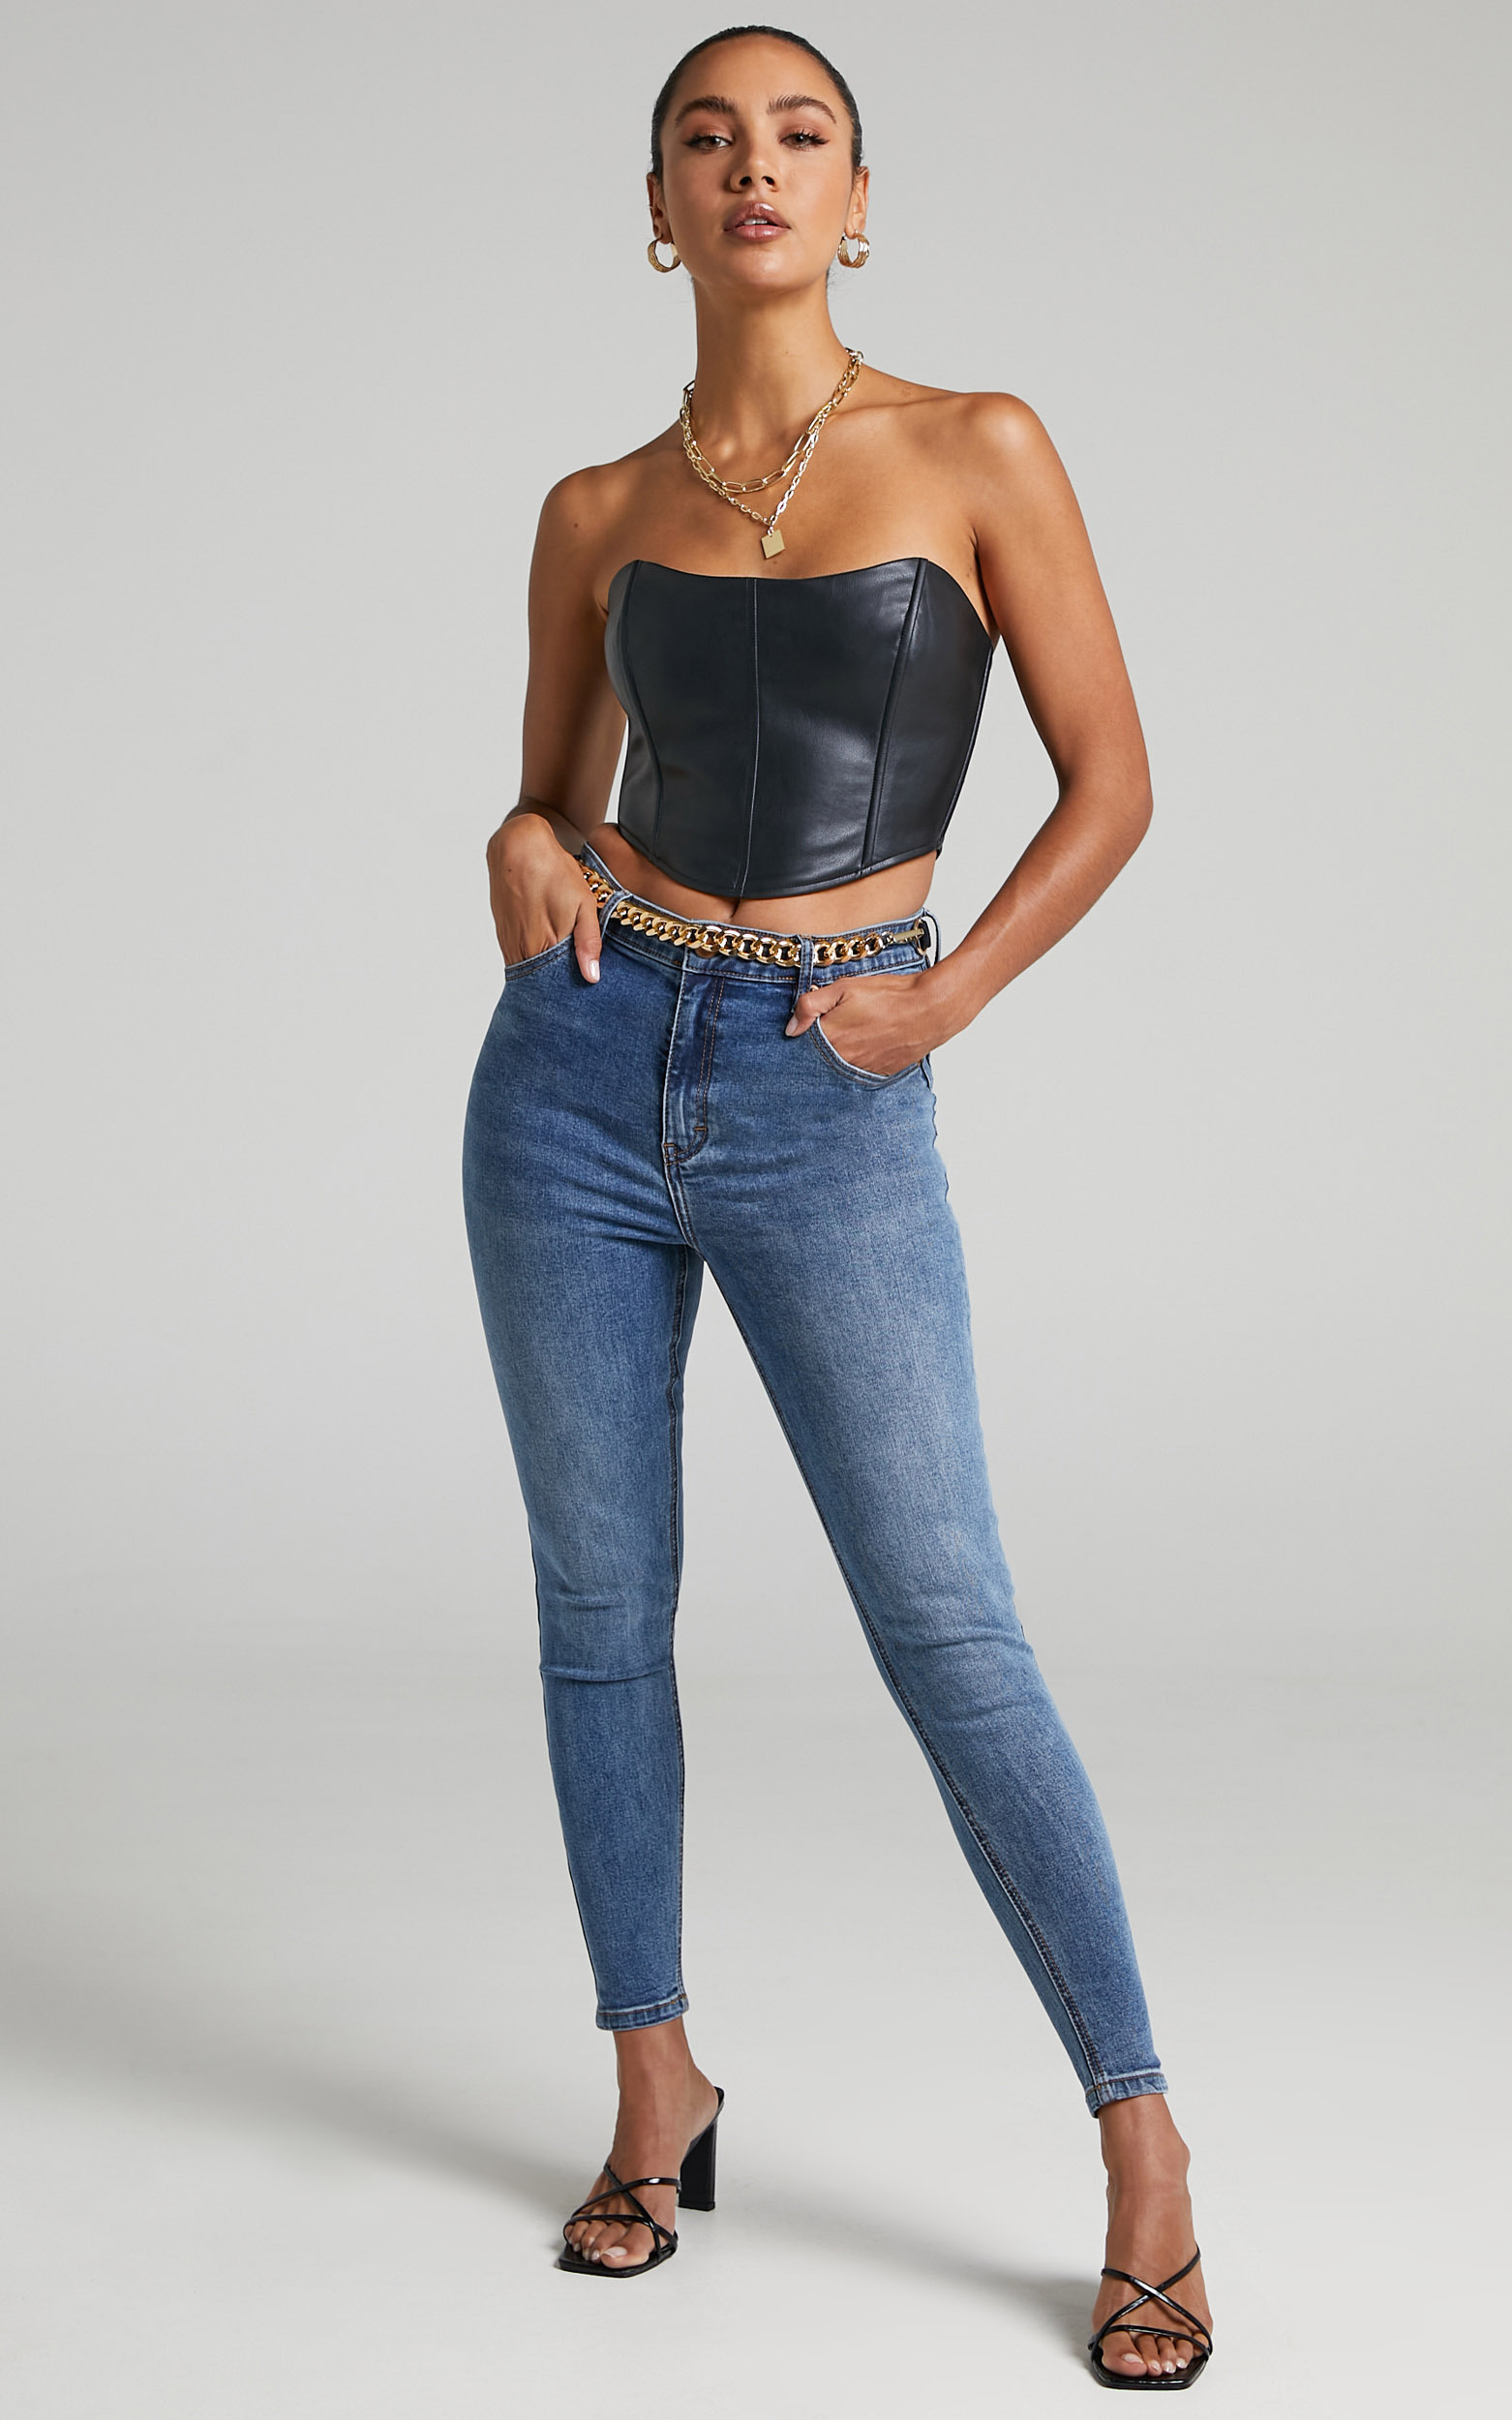 Lucilla Contour fitted Jeans in Blue - 04, BLU1, hi-res image number null